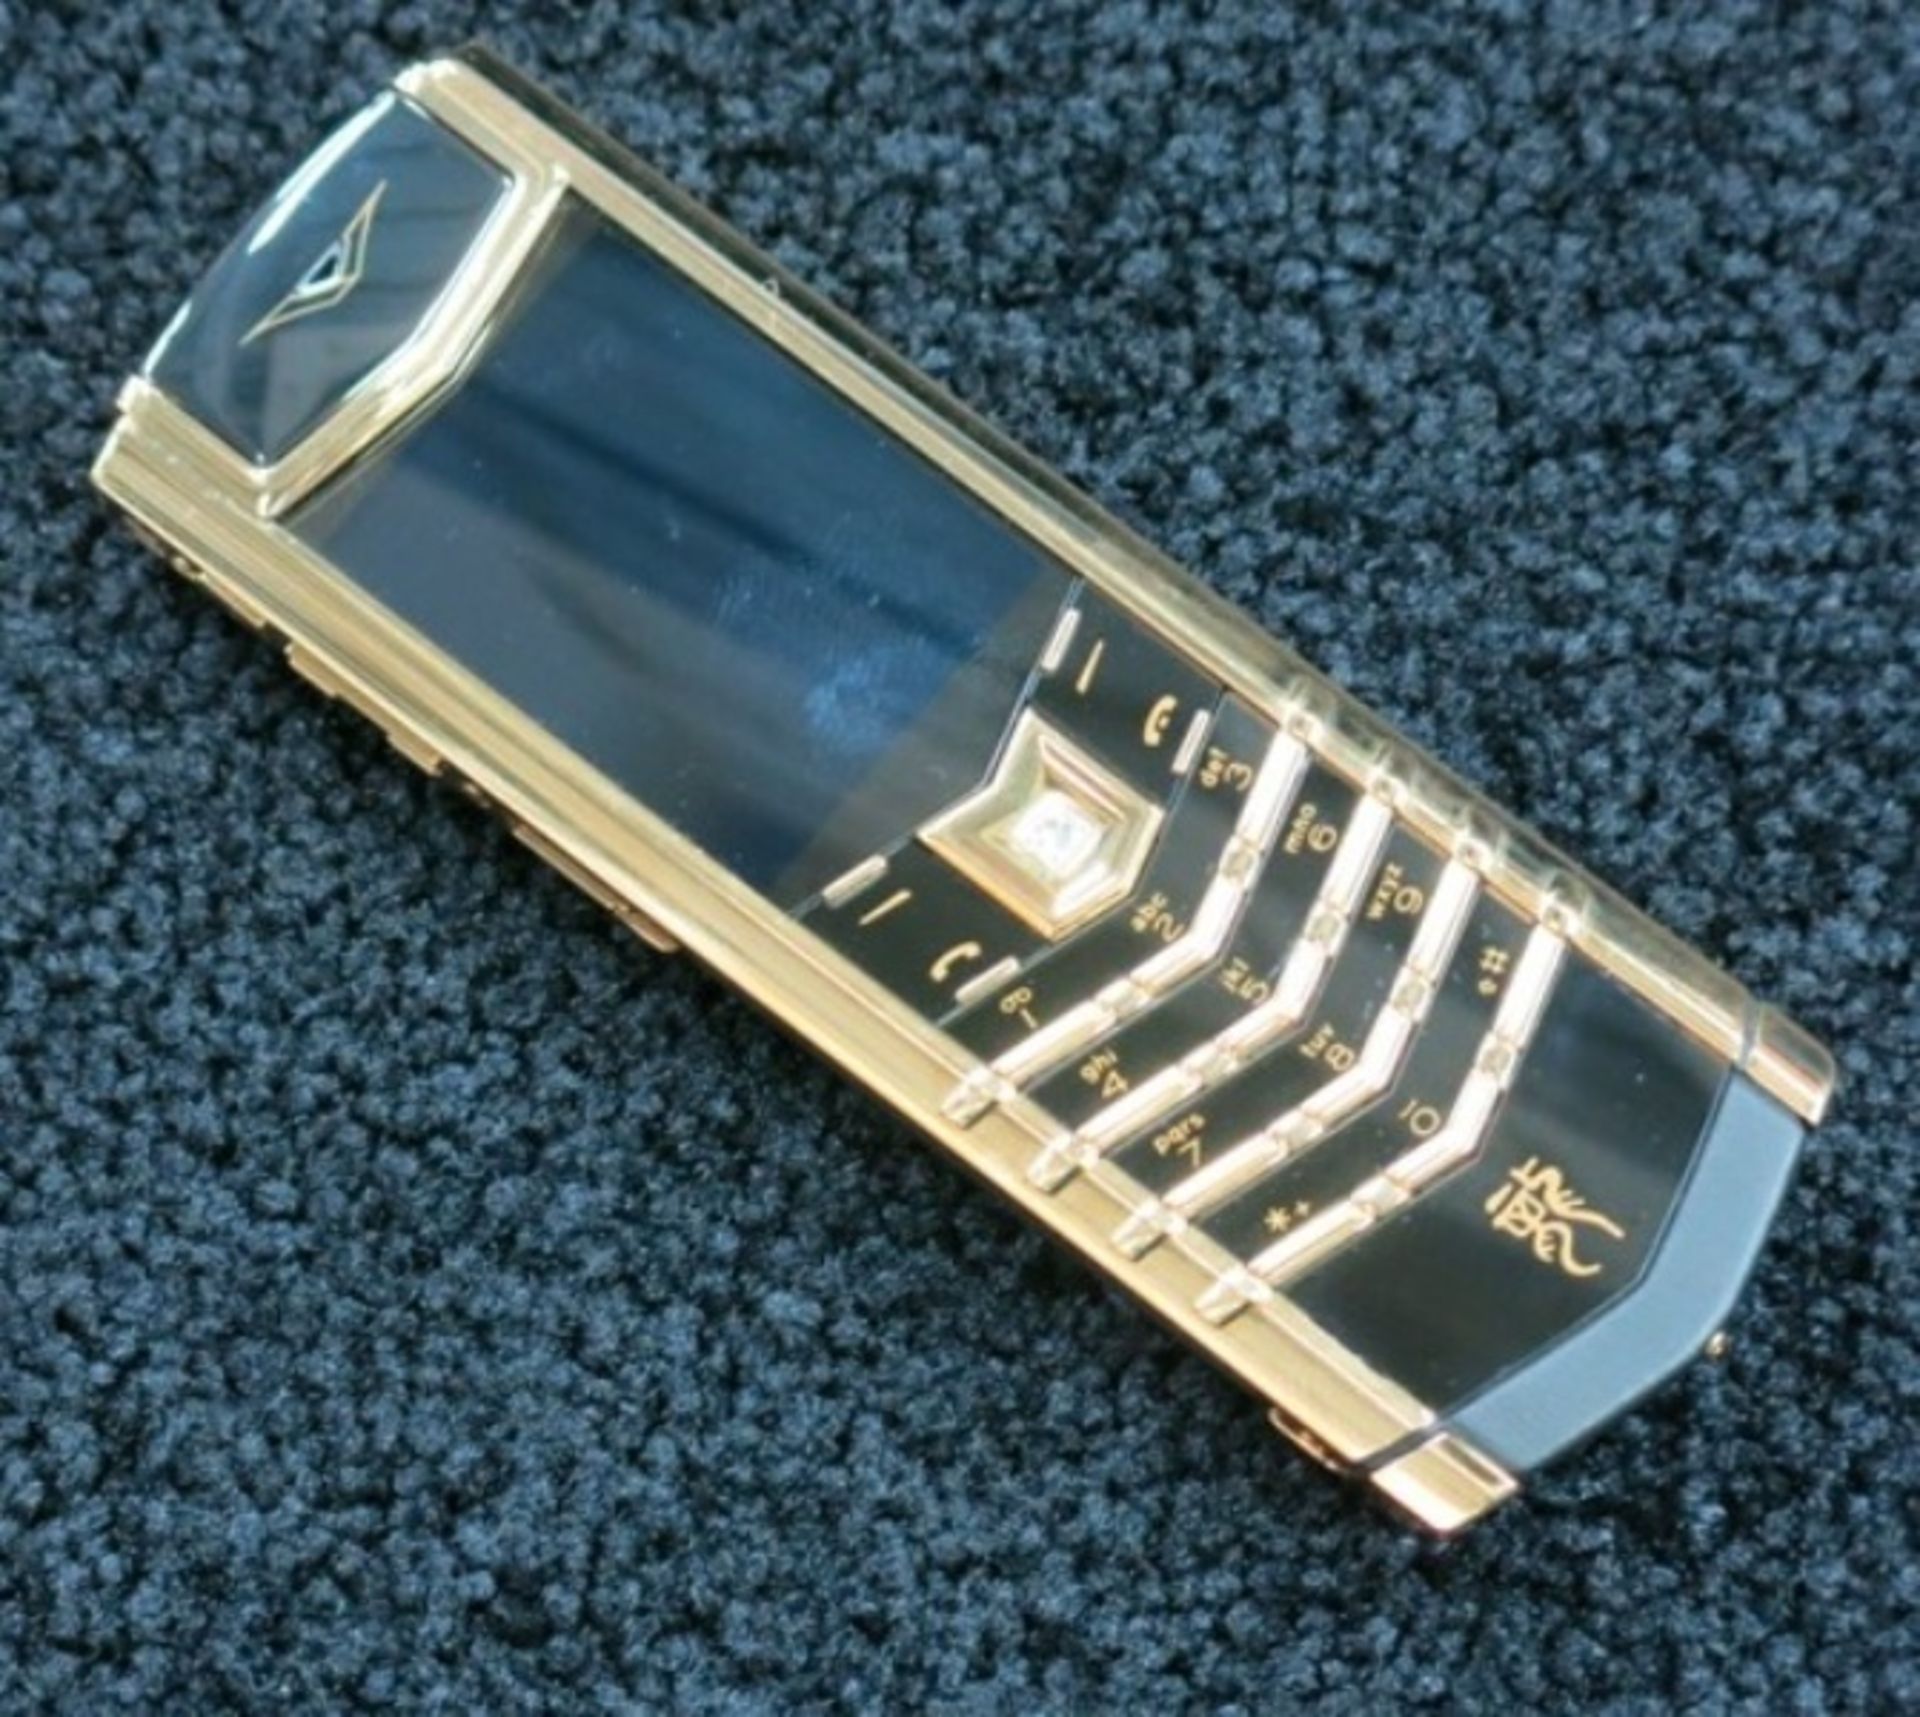 Vertu 18kt Yellow Gold Signature S Phone. Special Edition Dragon with Small Diamond Eyes & - Image 3 of 4